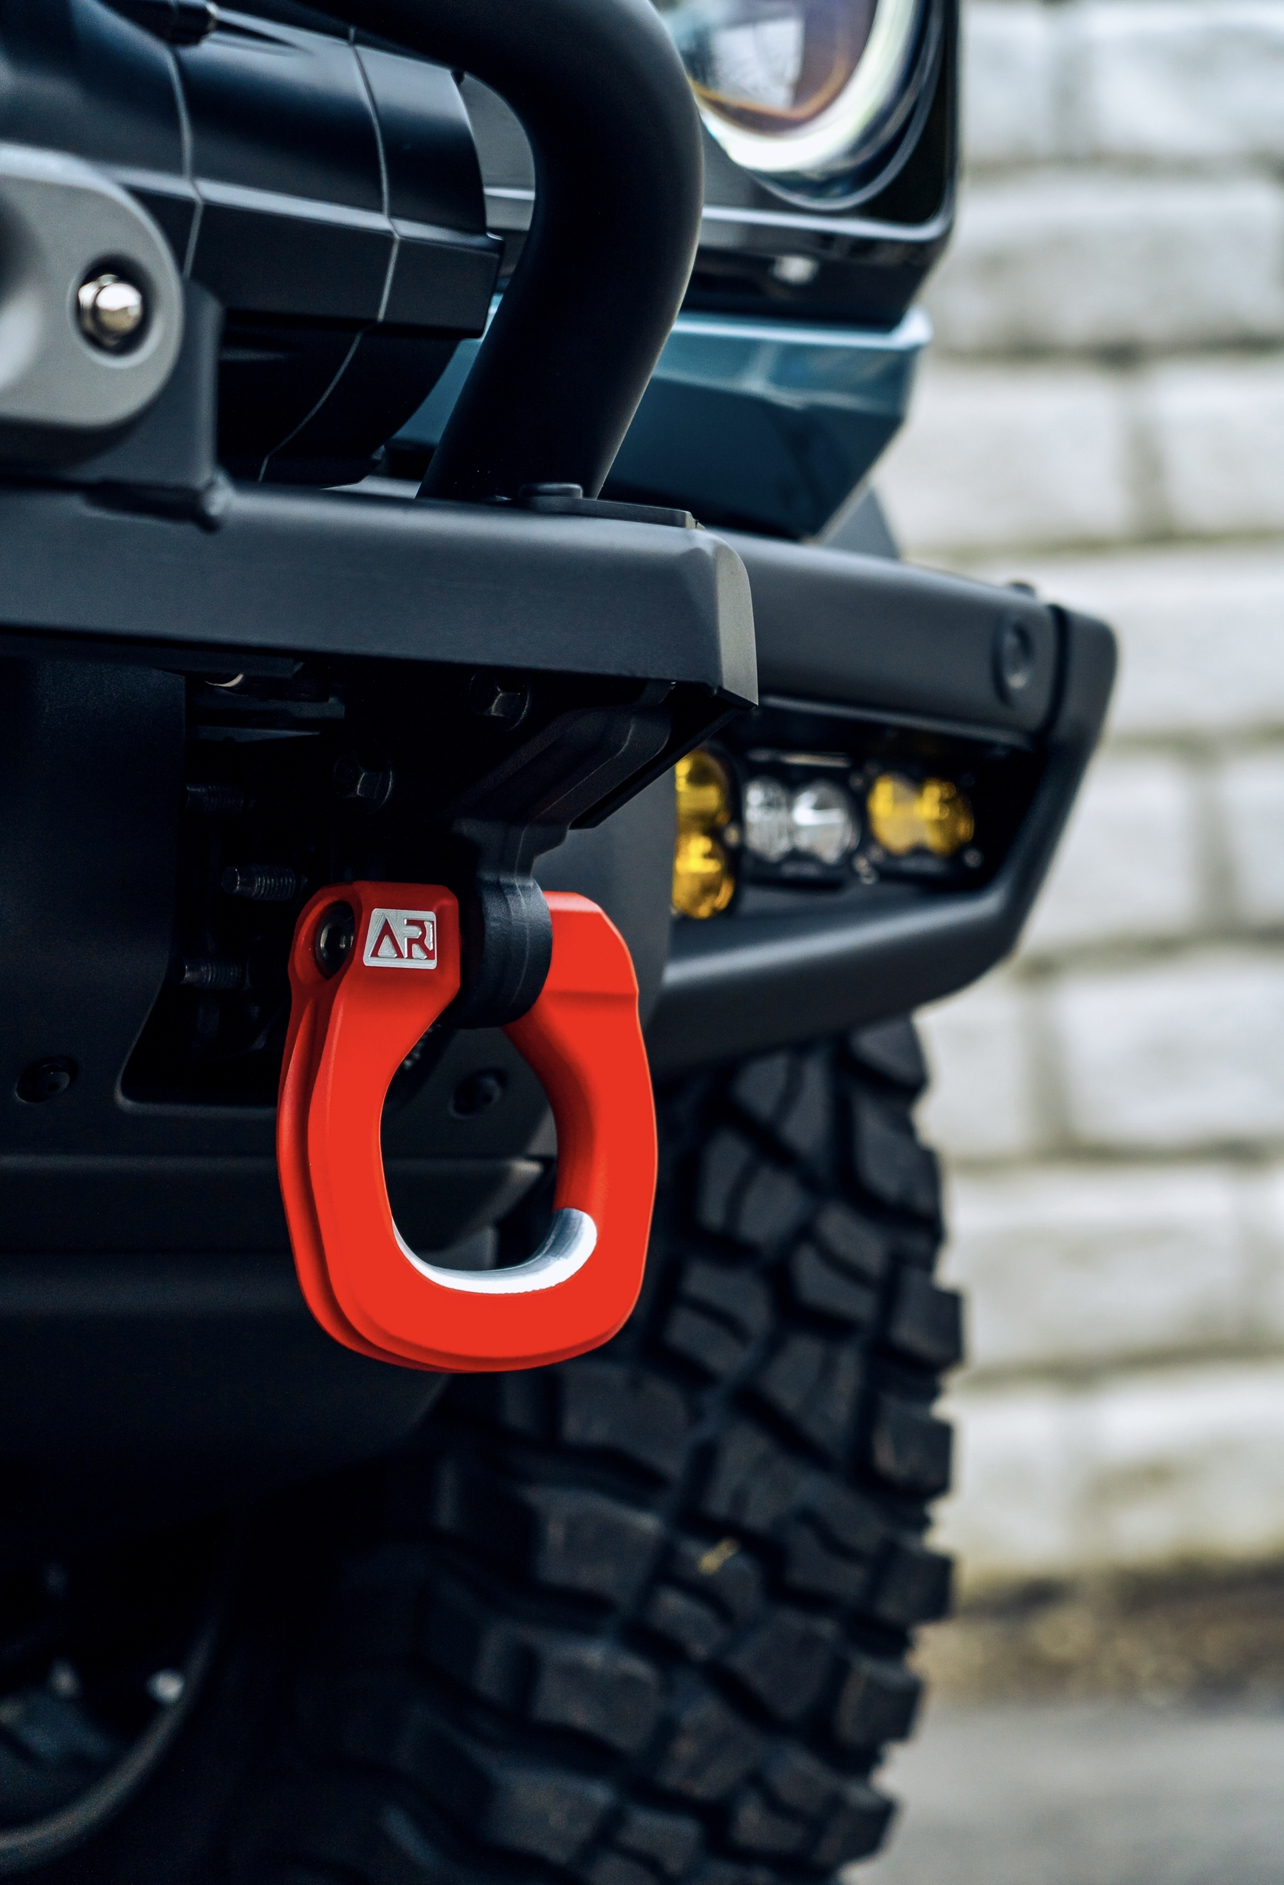 Ford Bronco AR | S.I.T.H. Modular Bumper Shackle - Common Hardware REIMAGINED 653FC0AC-9A8A-44BE-A734-F43C16F3C36B